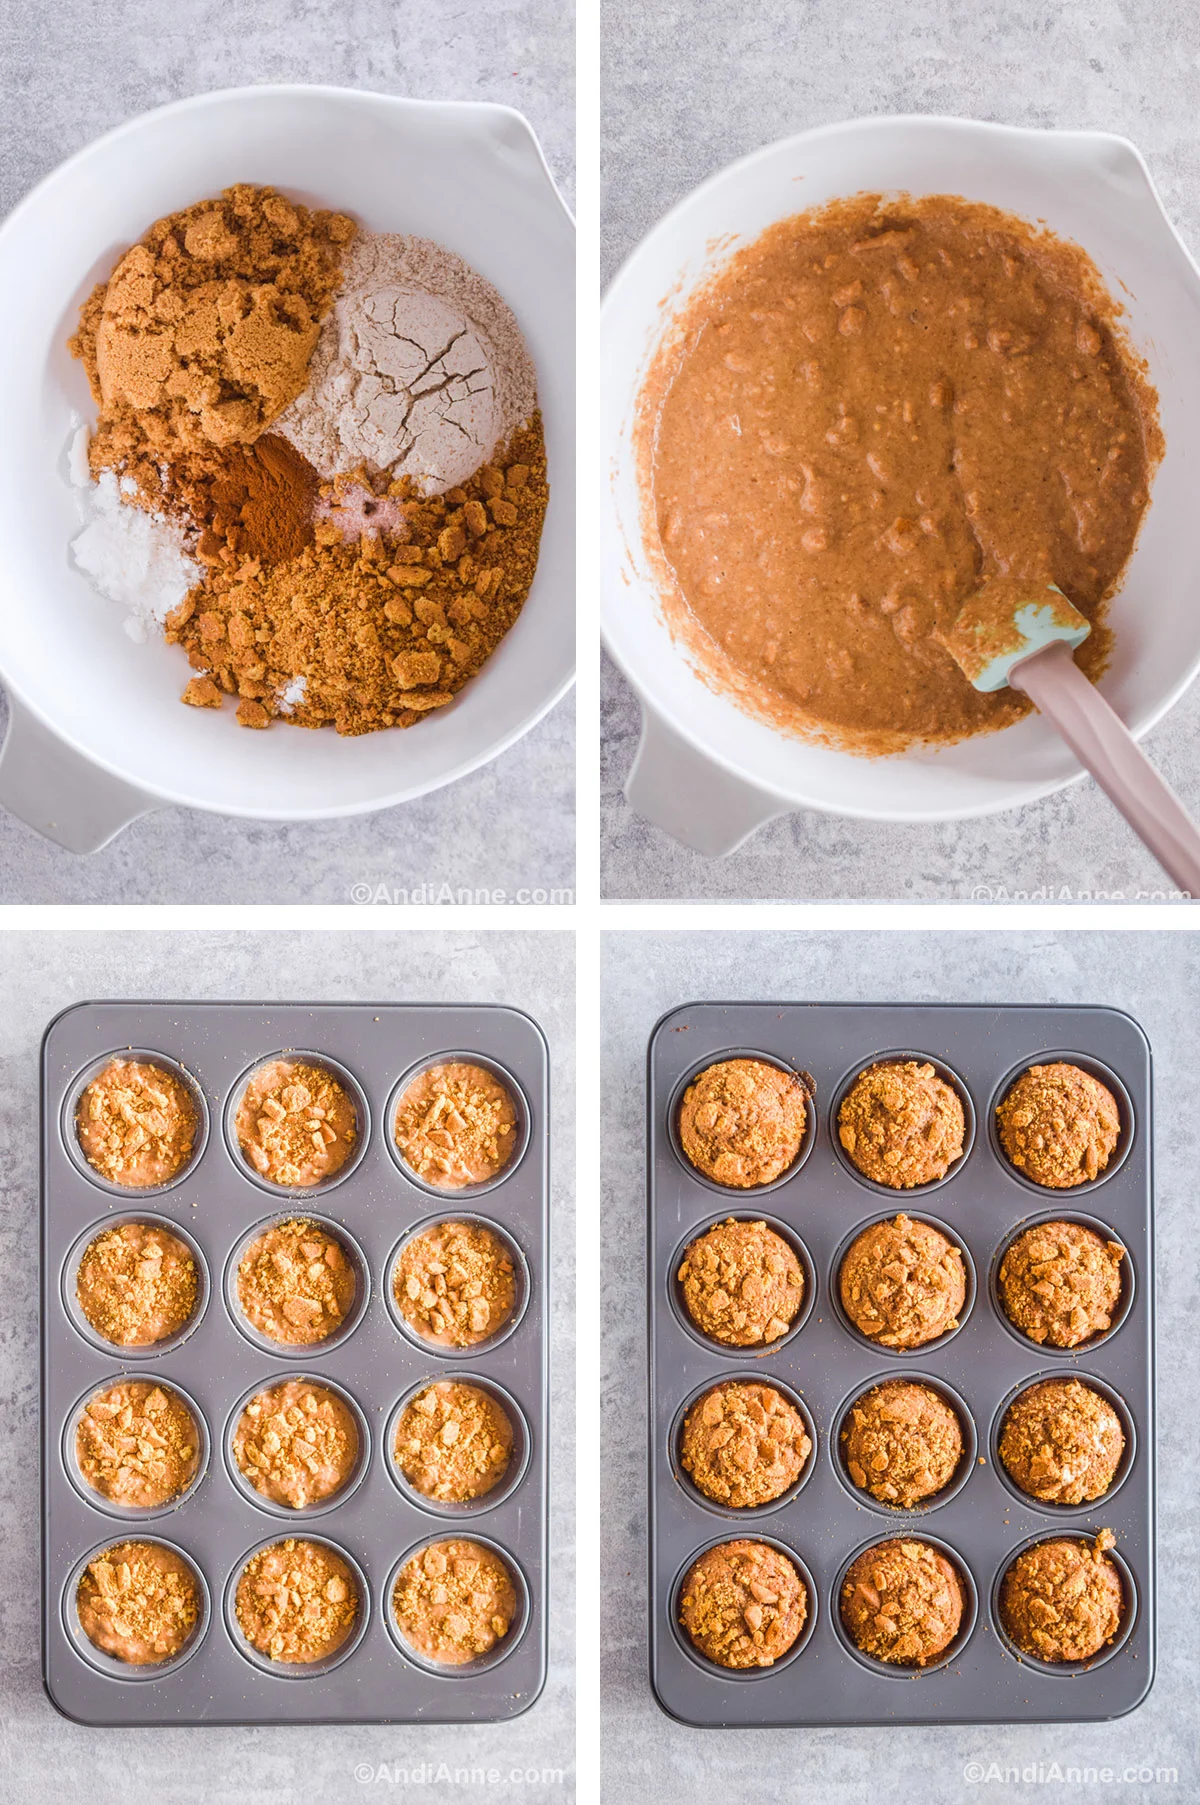 Four images together including a bowl with flours, graham crackers and sugar. The wet batter in a white bowl with a spatula. Wet batter in a muffin pan with crushed graham crackers on top. and cooked muffins in pan with crush graham crackers.